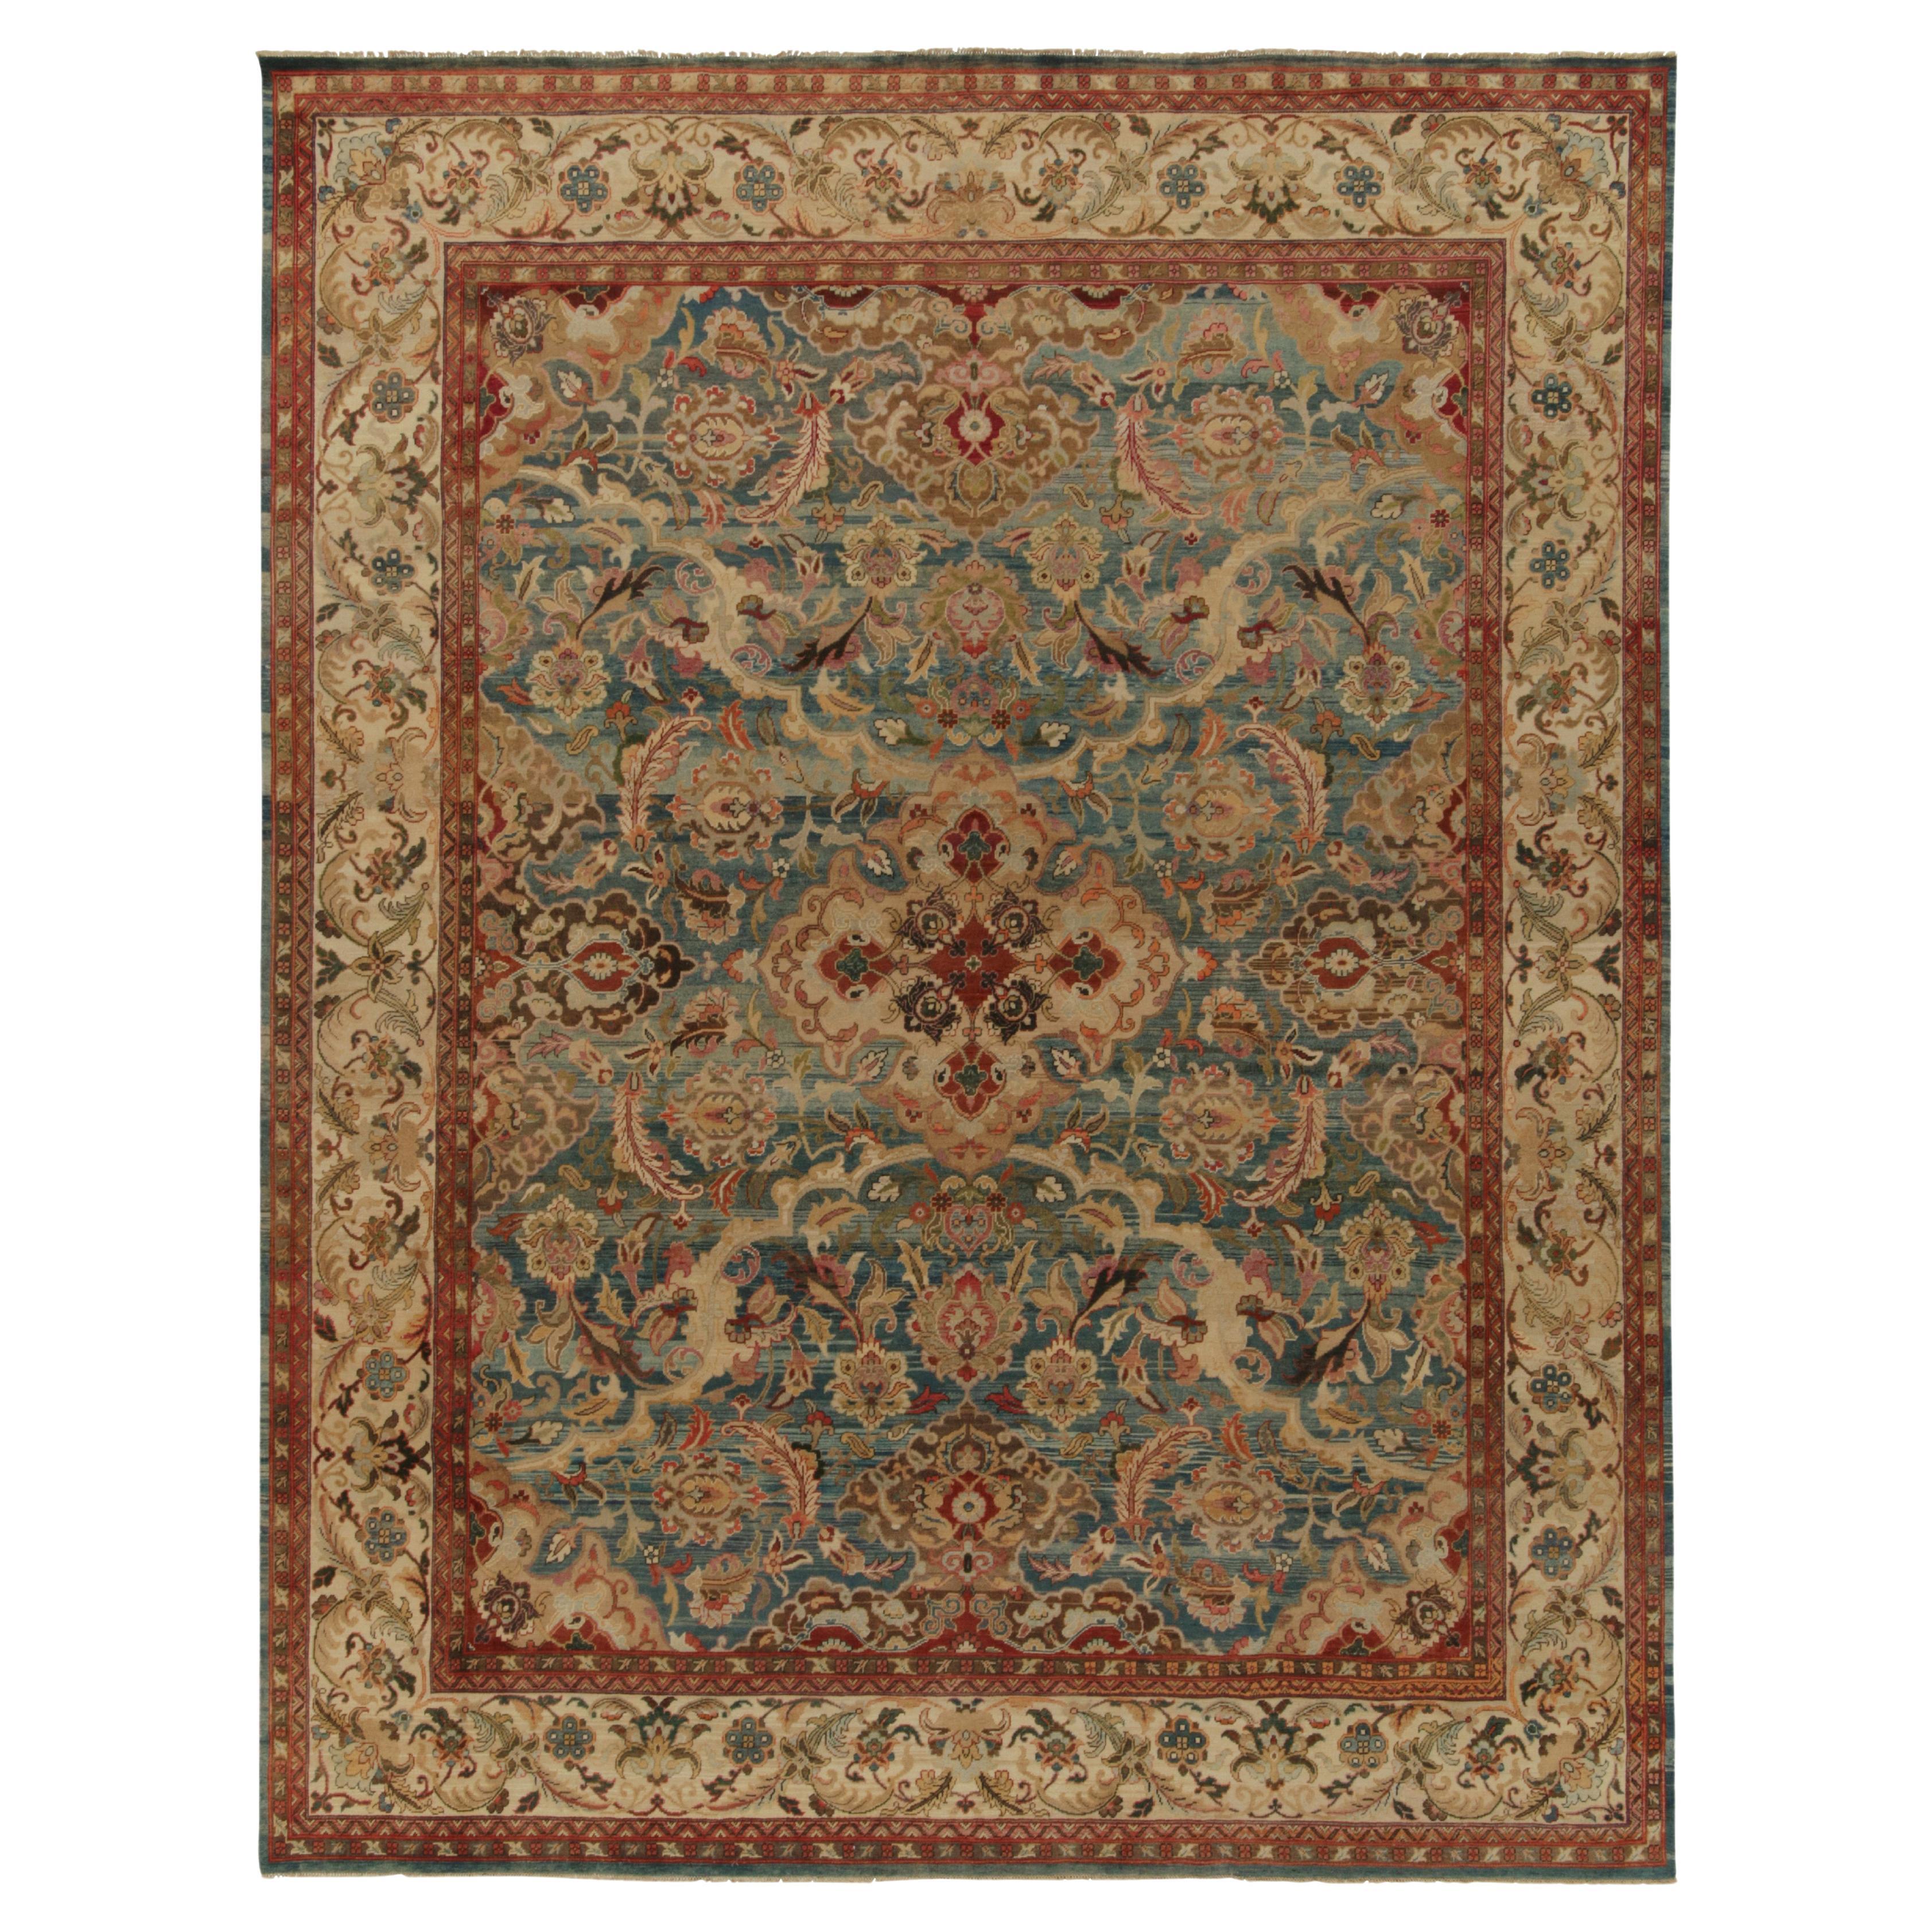 Rug & Kilim’s Classic Persian style rug in Blue and Beige-Brown Floral Patterns For Sale